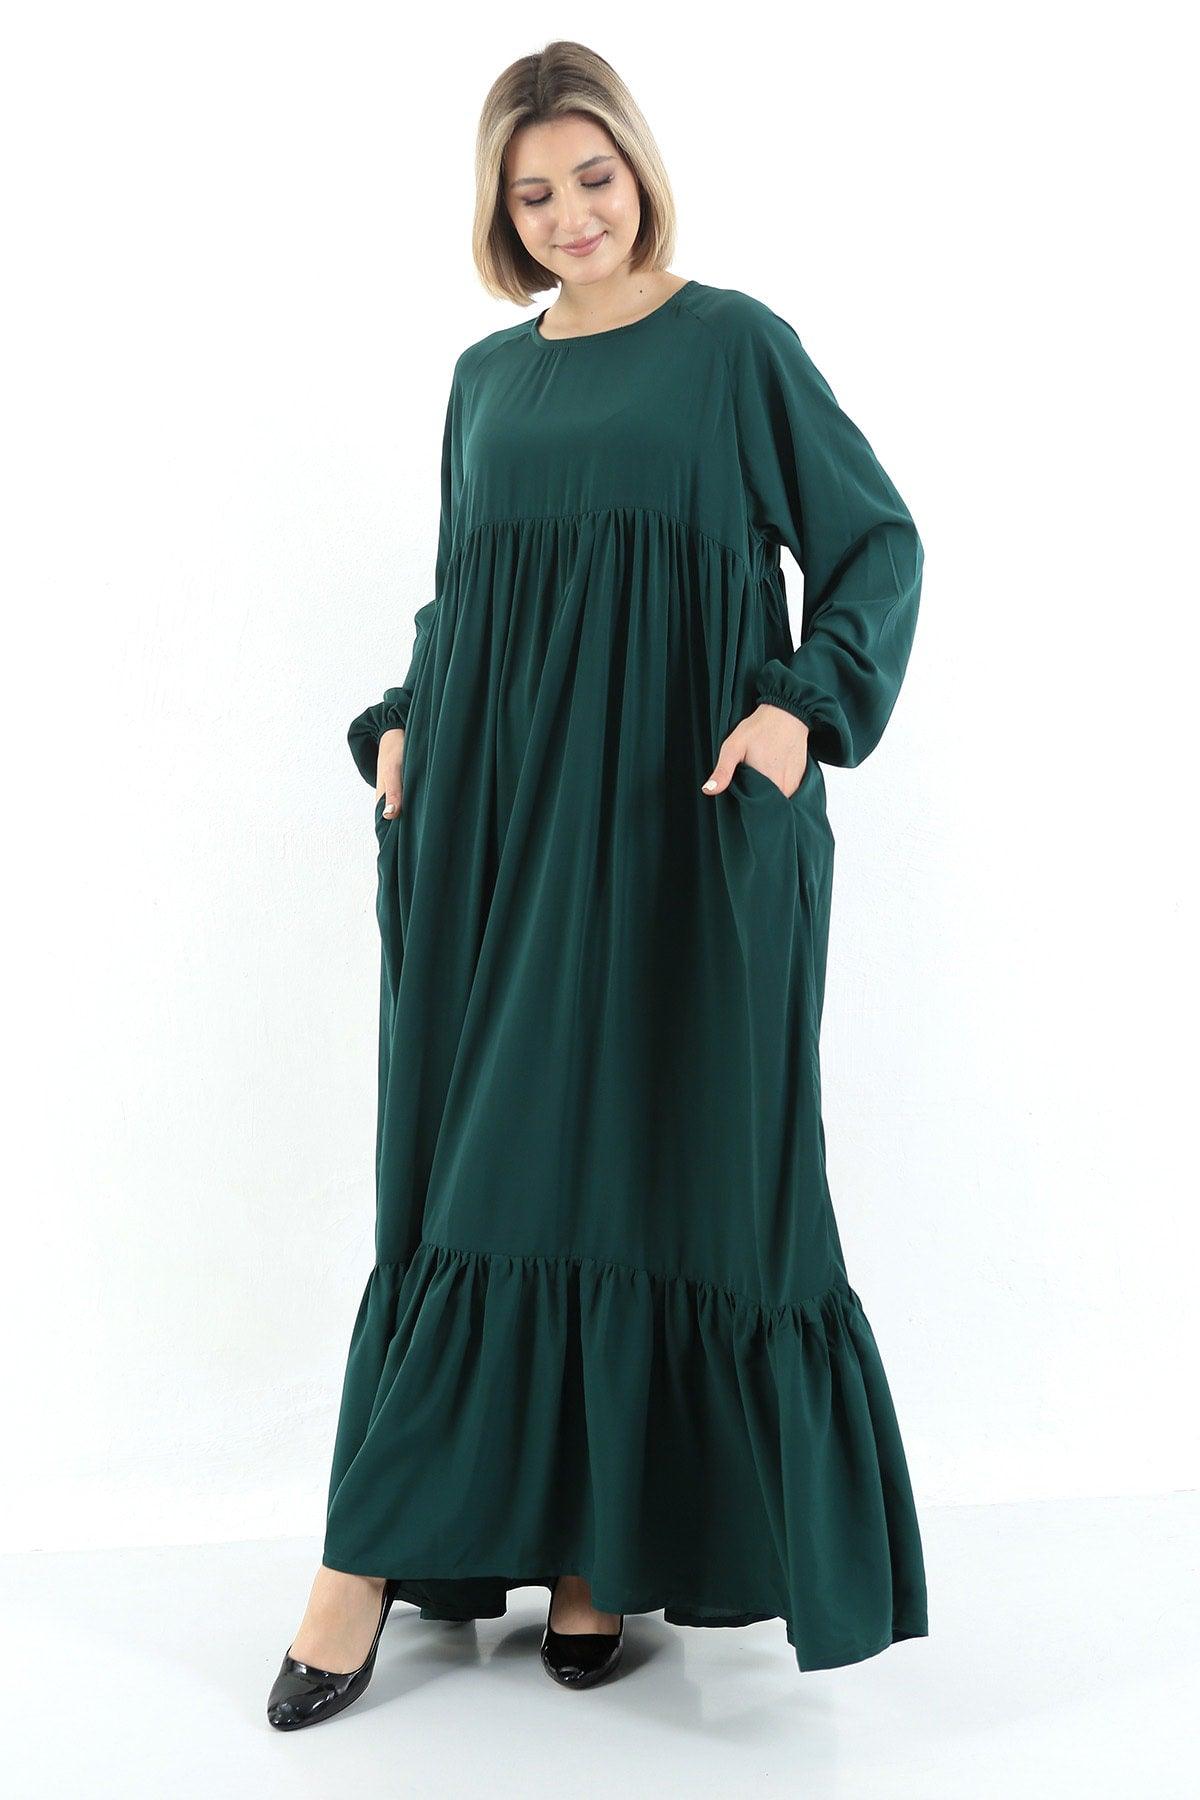 Emerald Green Crew Neck Relaxed Fit Elastic Sleeve Side Pockets Pleated Robe Dress - Swordslife